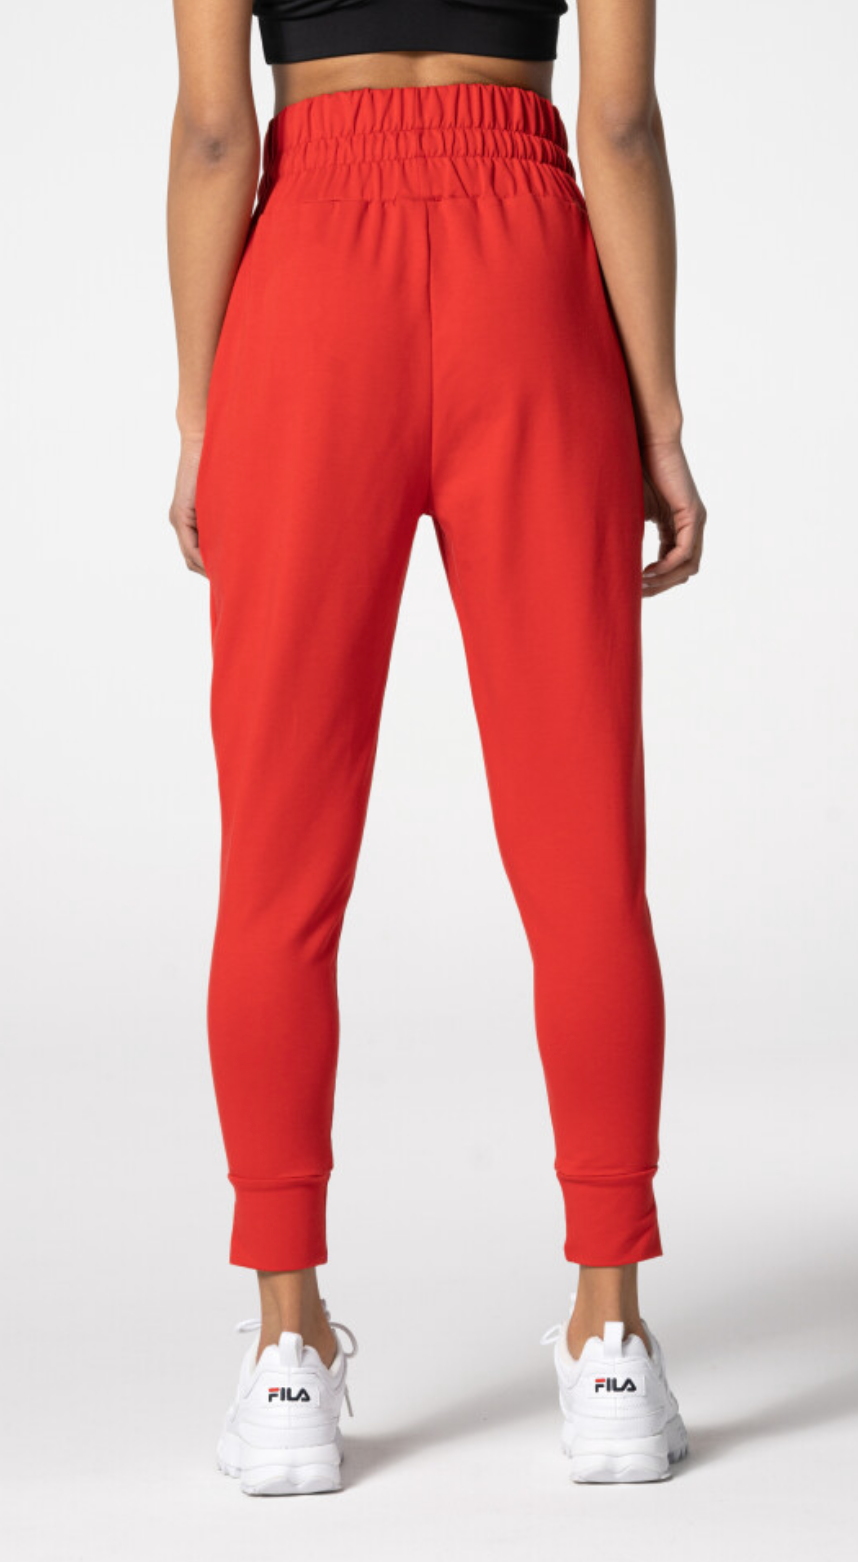 Carpatree Fair Sweatpants - Red jogger style tracksuit bottoms with deep elasticated high waist that ties and pockets. Made of strong stretch cotton.